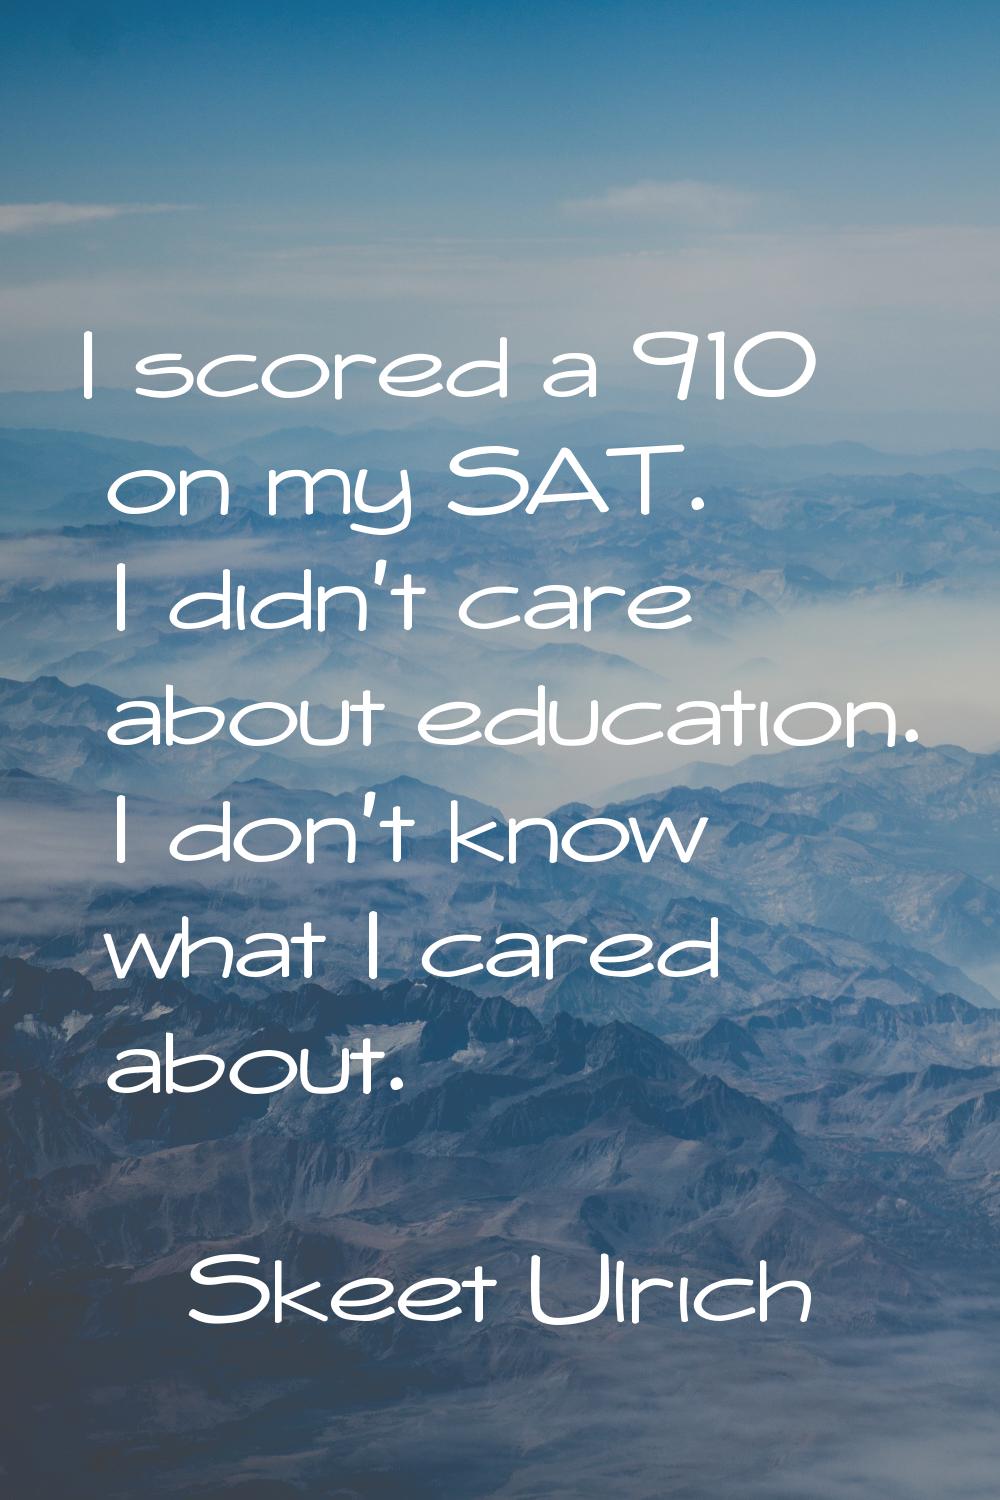 I scored a 910 on my SAT. I didn't care about education. I don't know what I cared about.